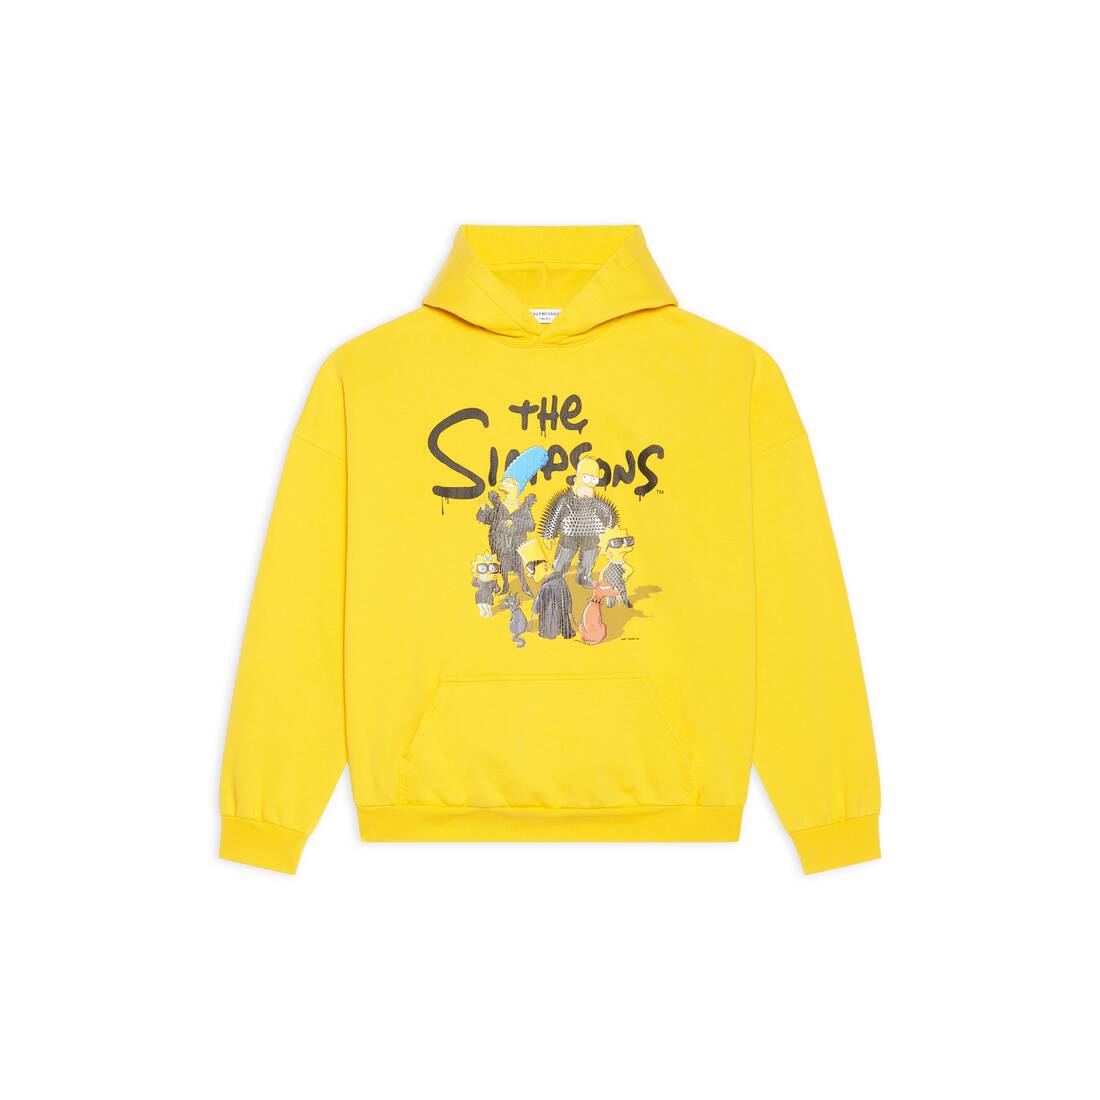 the simpsons tm & © 20th television hoodie wide fit